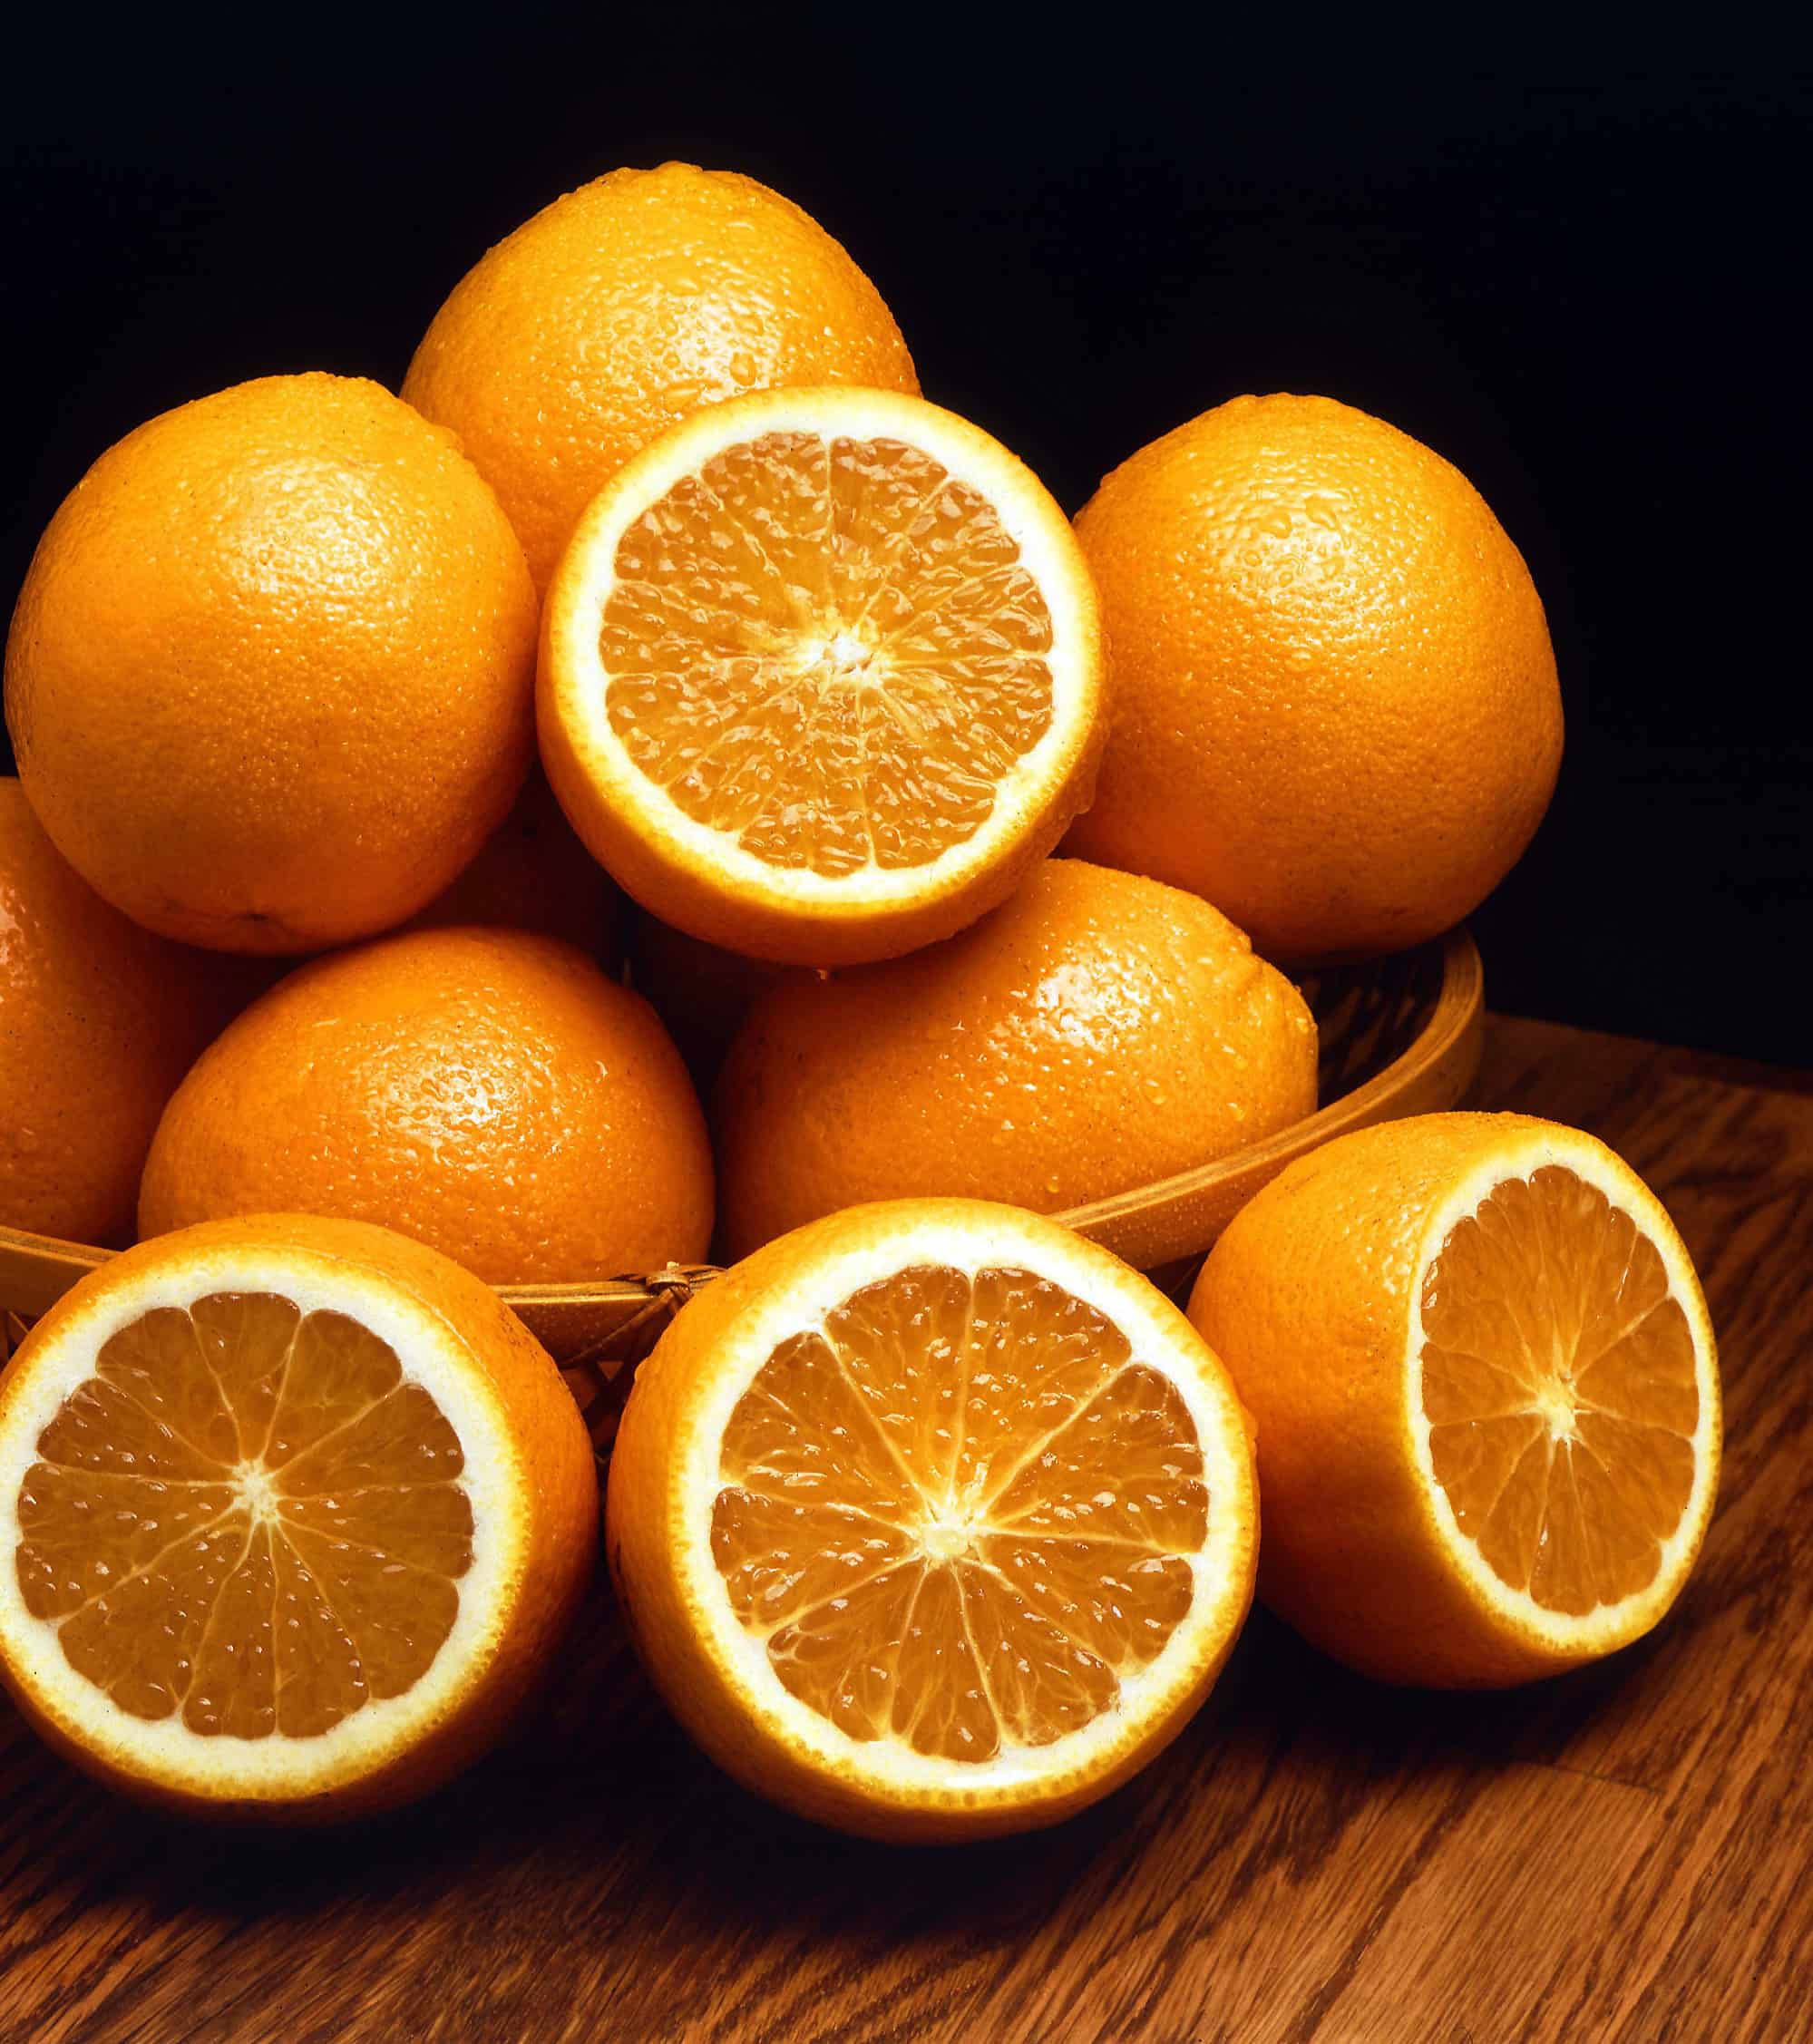 Oranges- Nutritional Importance And Health Benefits